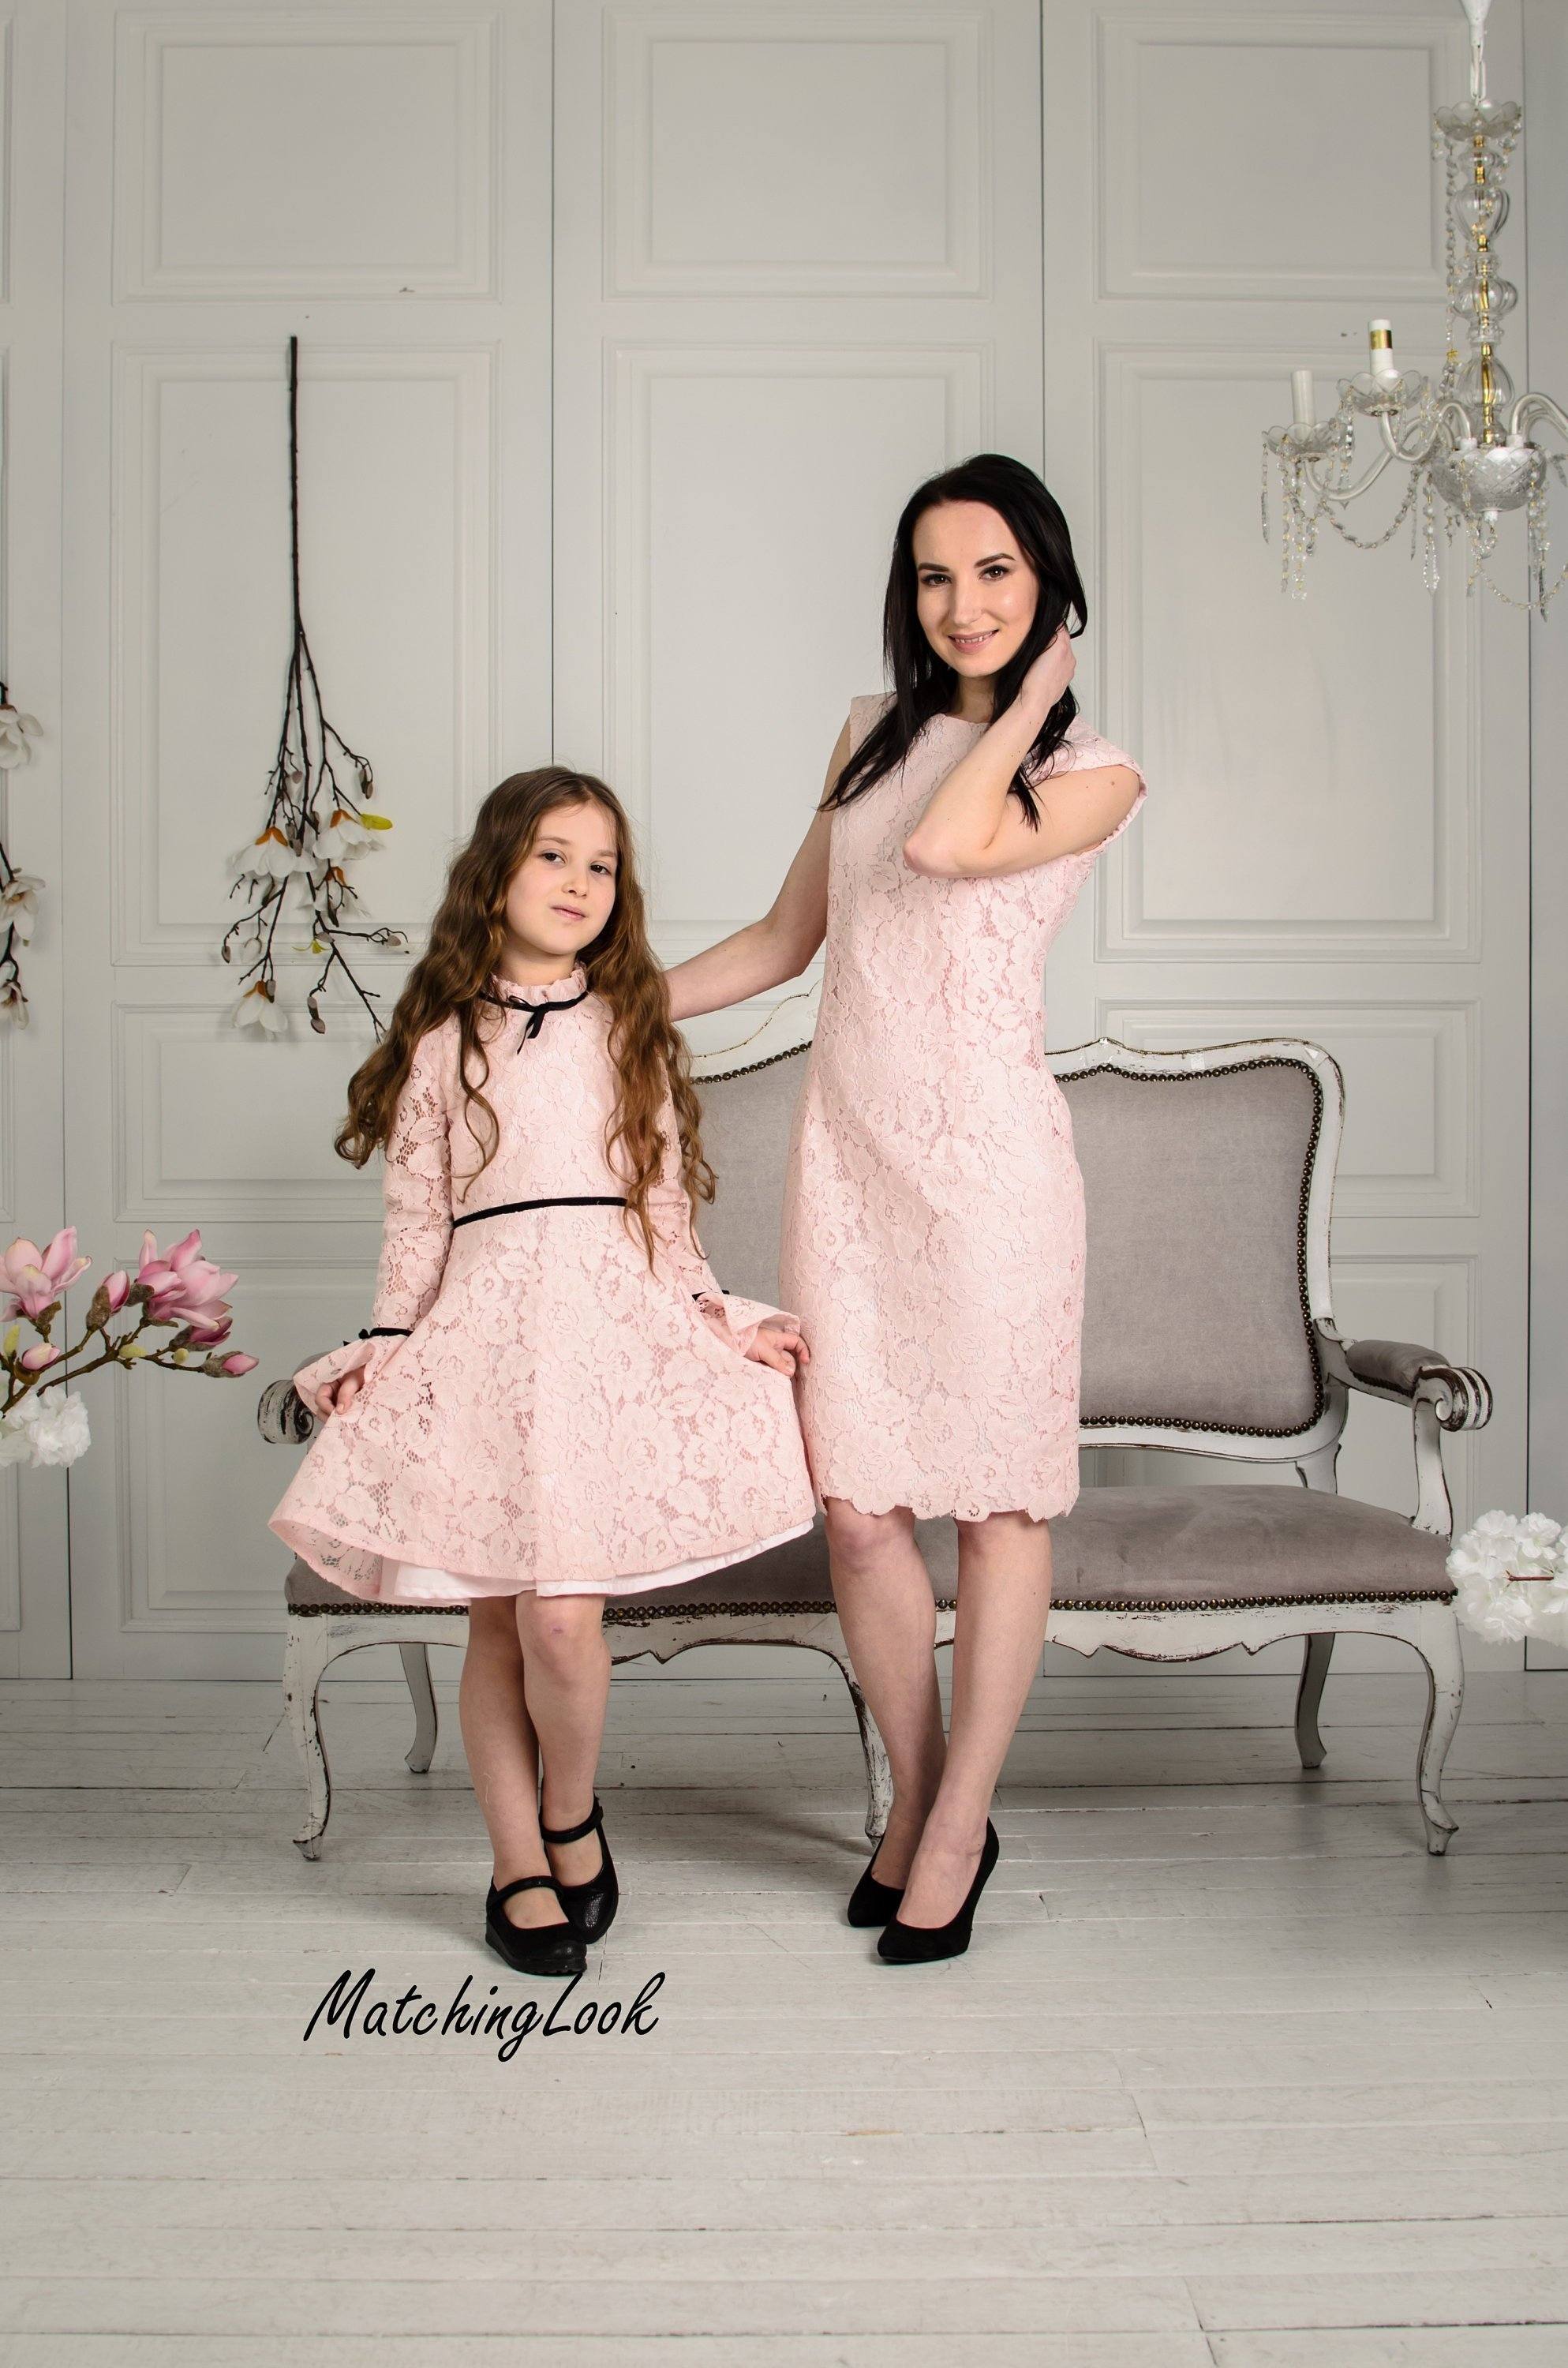 matching outfits for mum and daughter